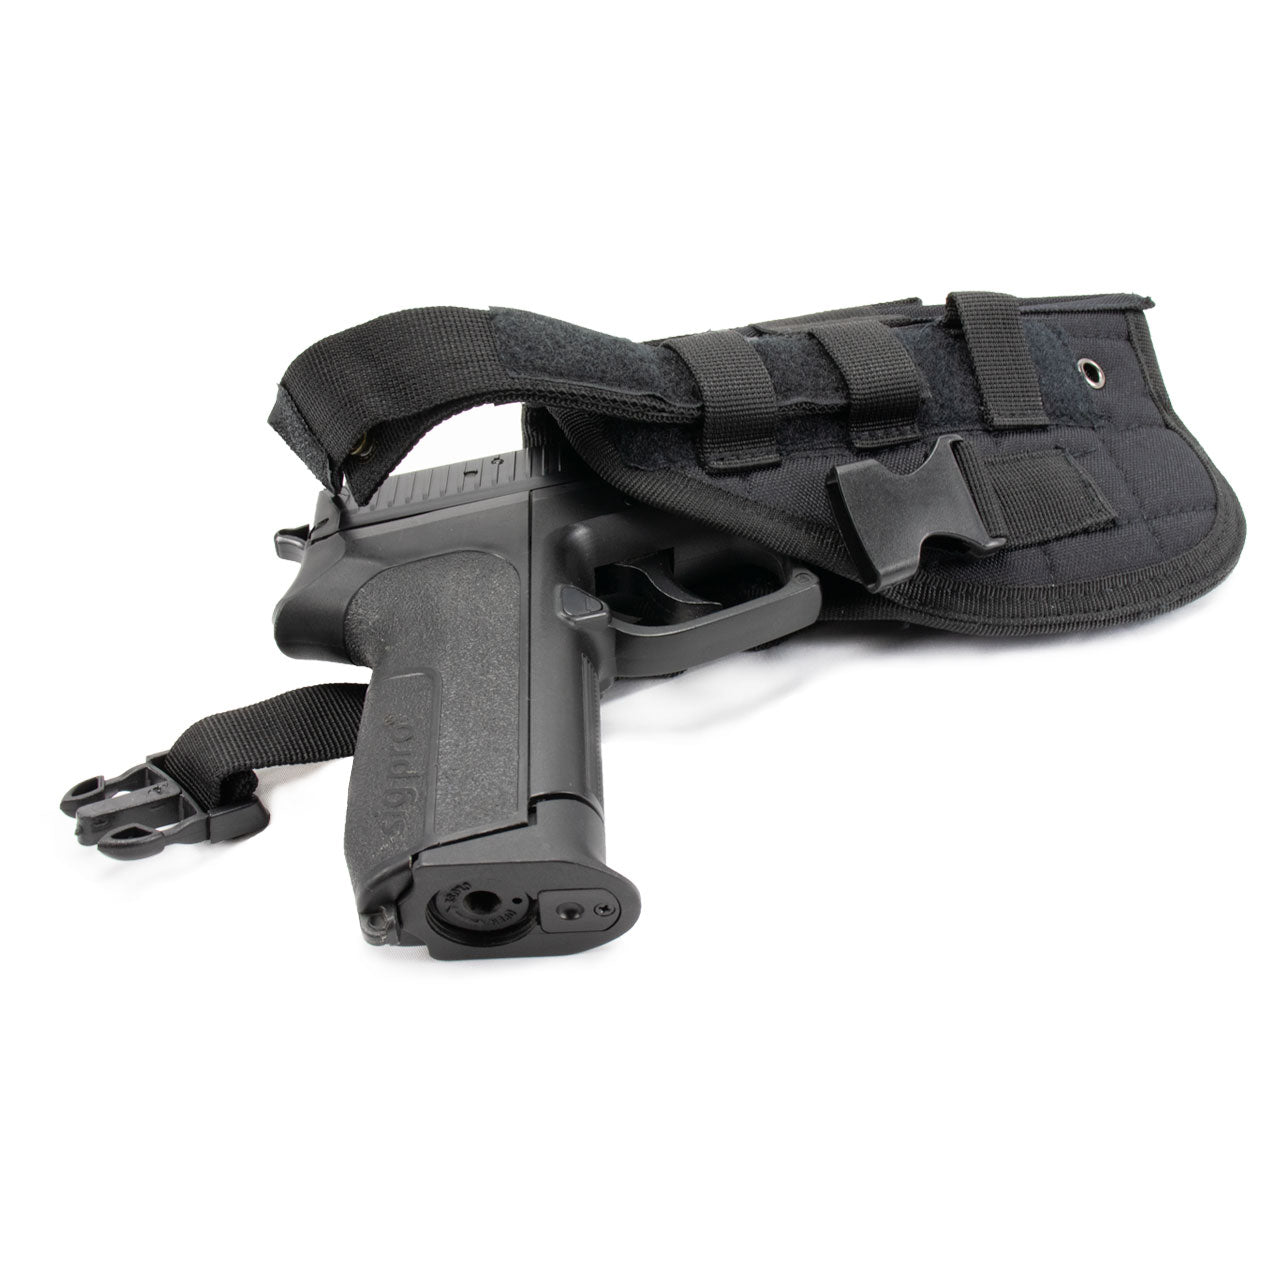 Matrix ST24-2 Molle Holster for Airsoft Pistols